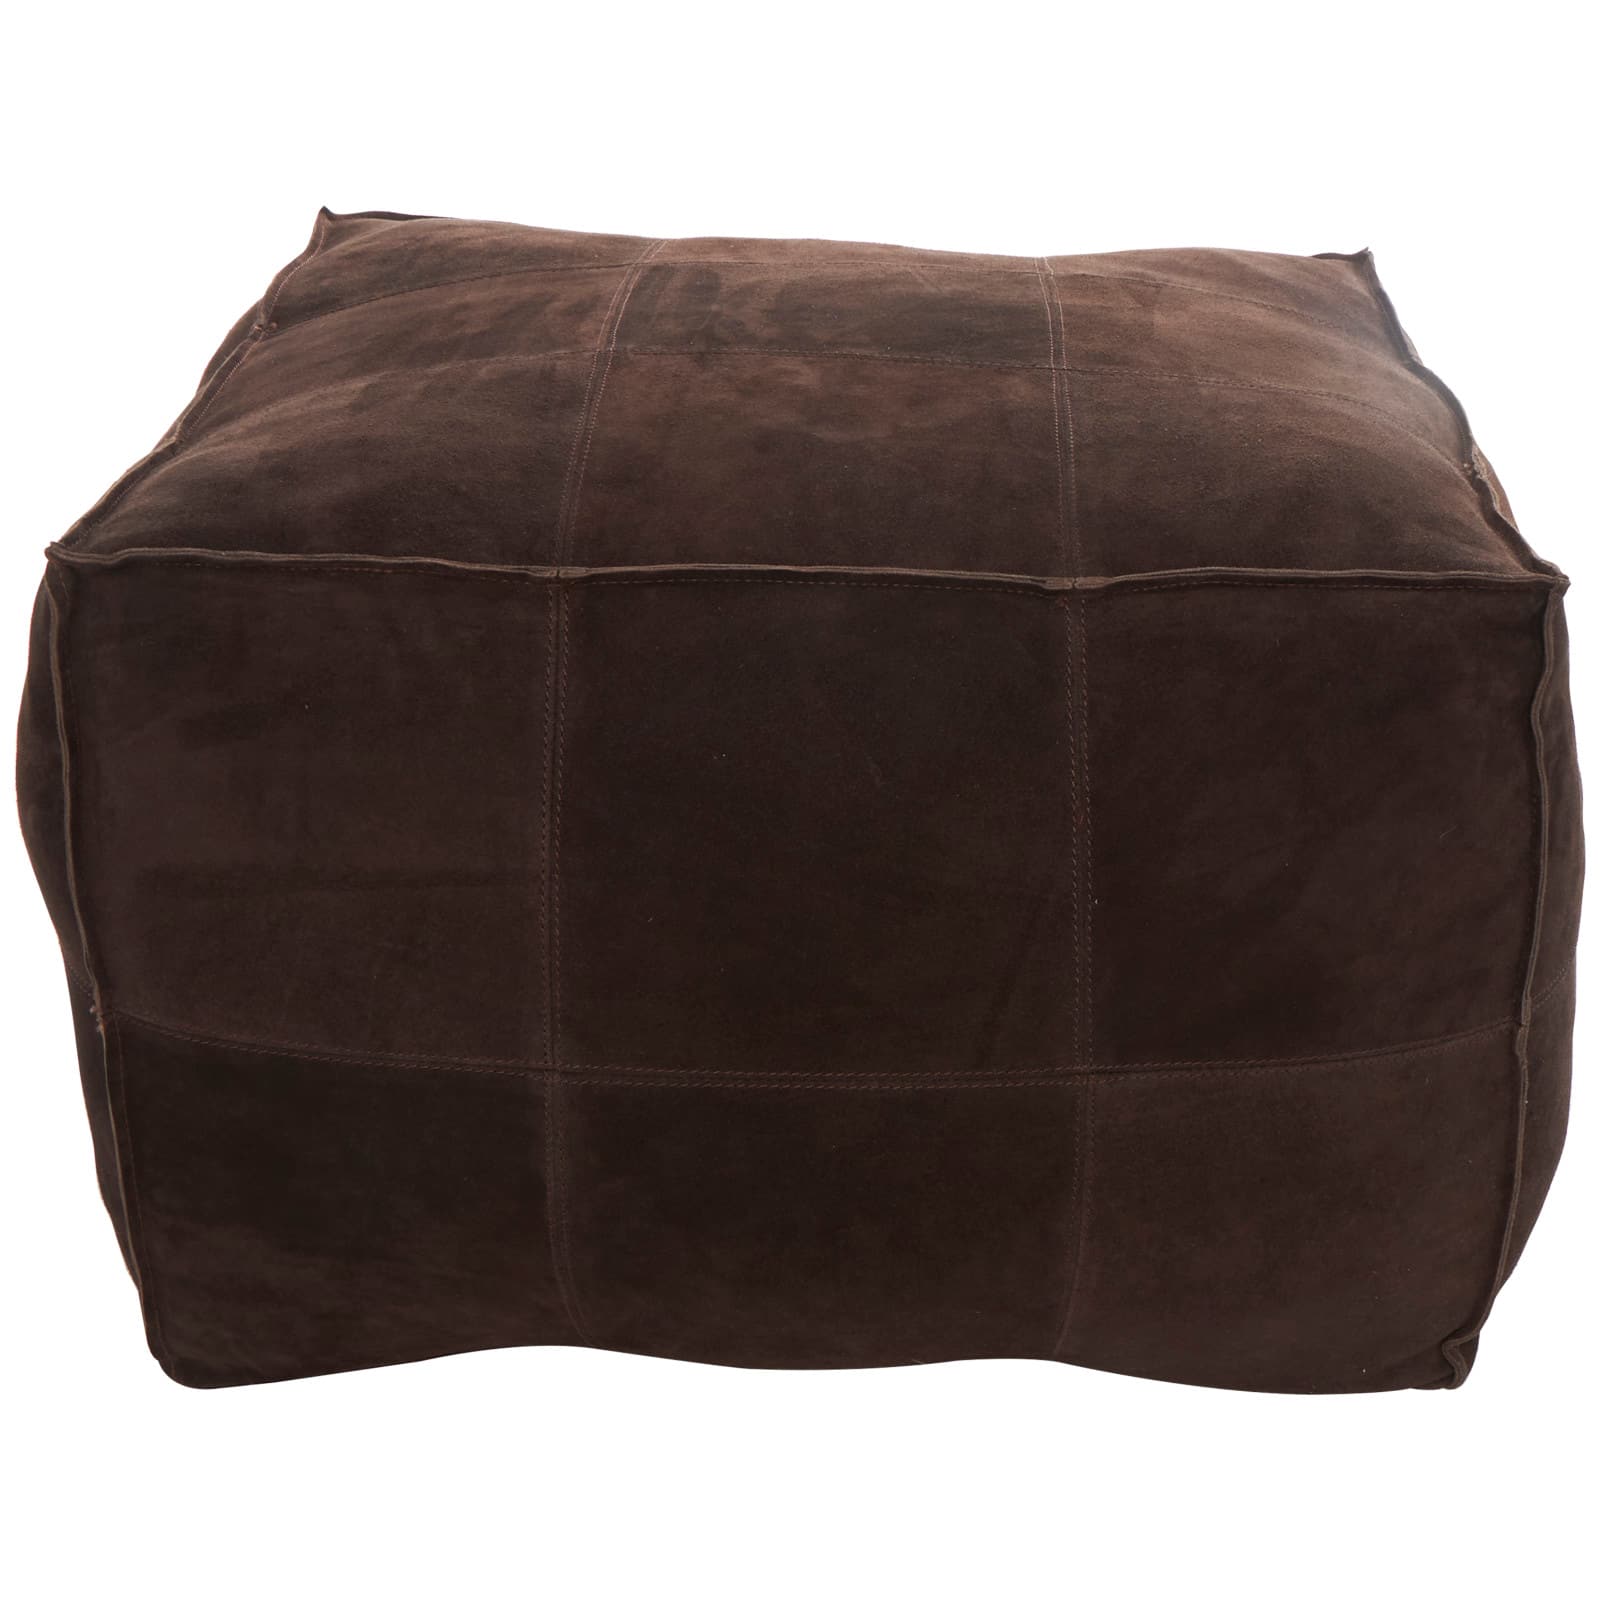 28" Leather Low Profile Square Pouf with Patchwork Design